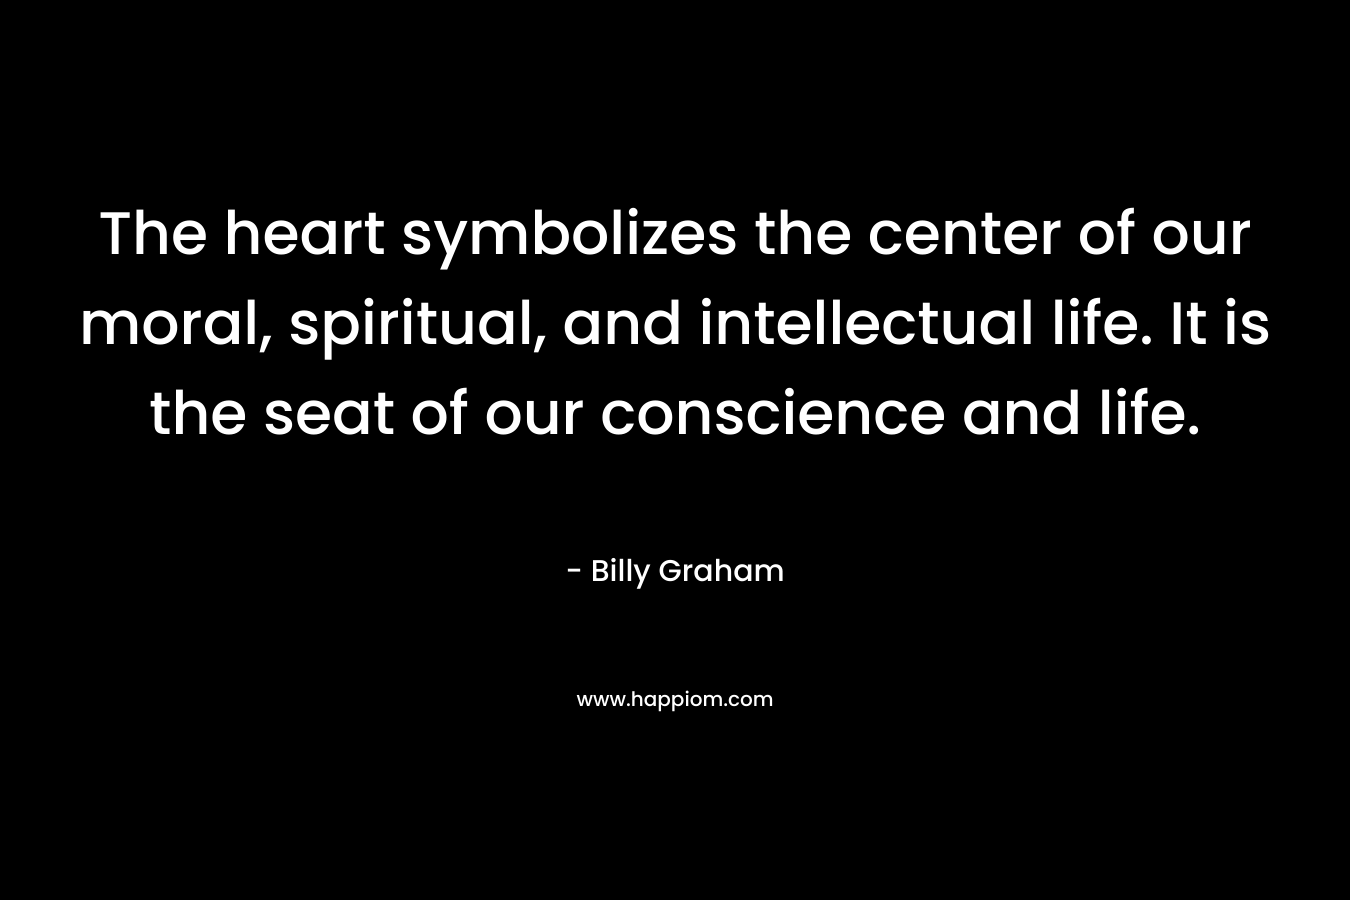 The heart symbolizes the center of our moral, spiritual, and intellectual life. It is the seat of our conscience and life.